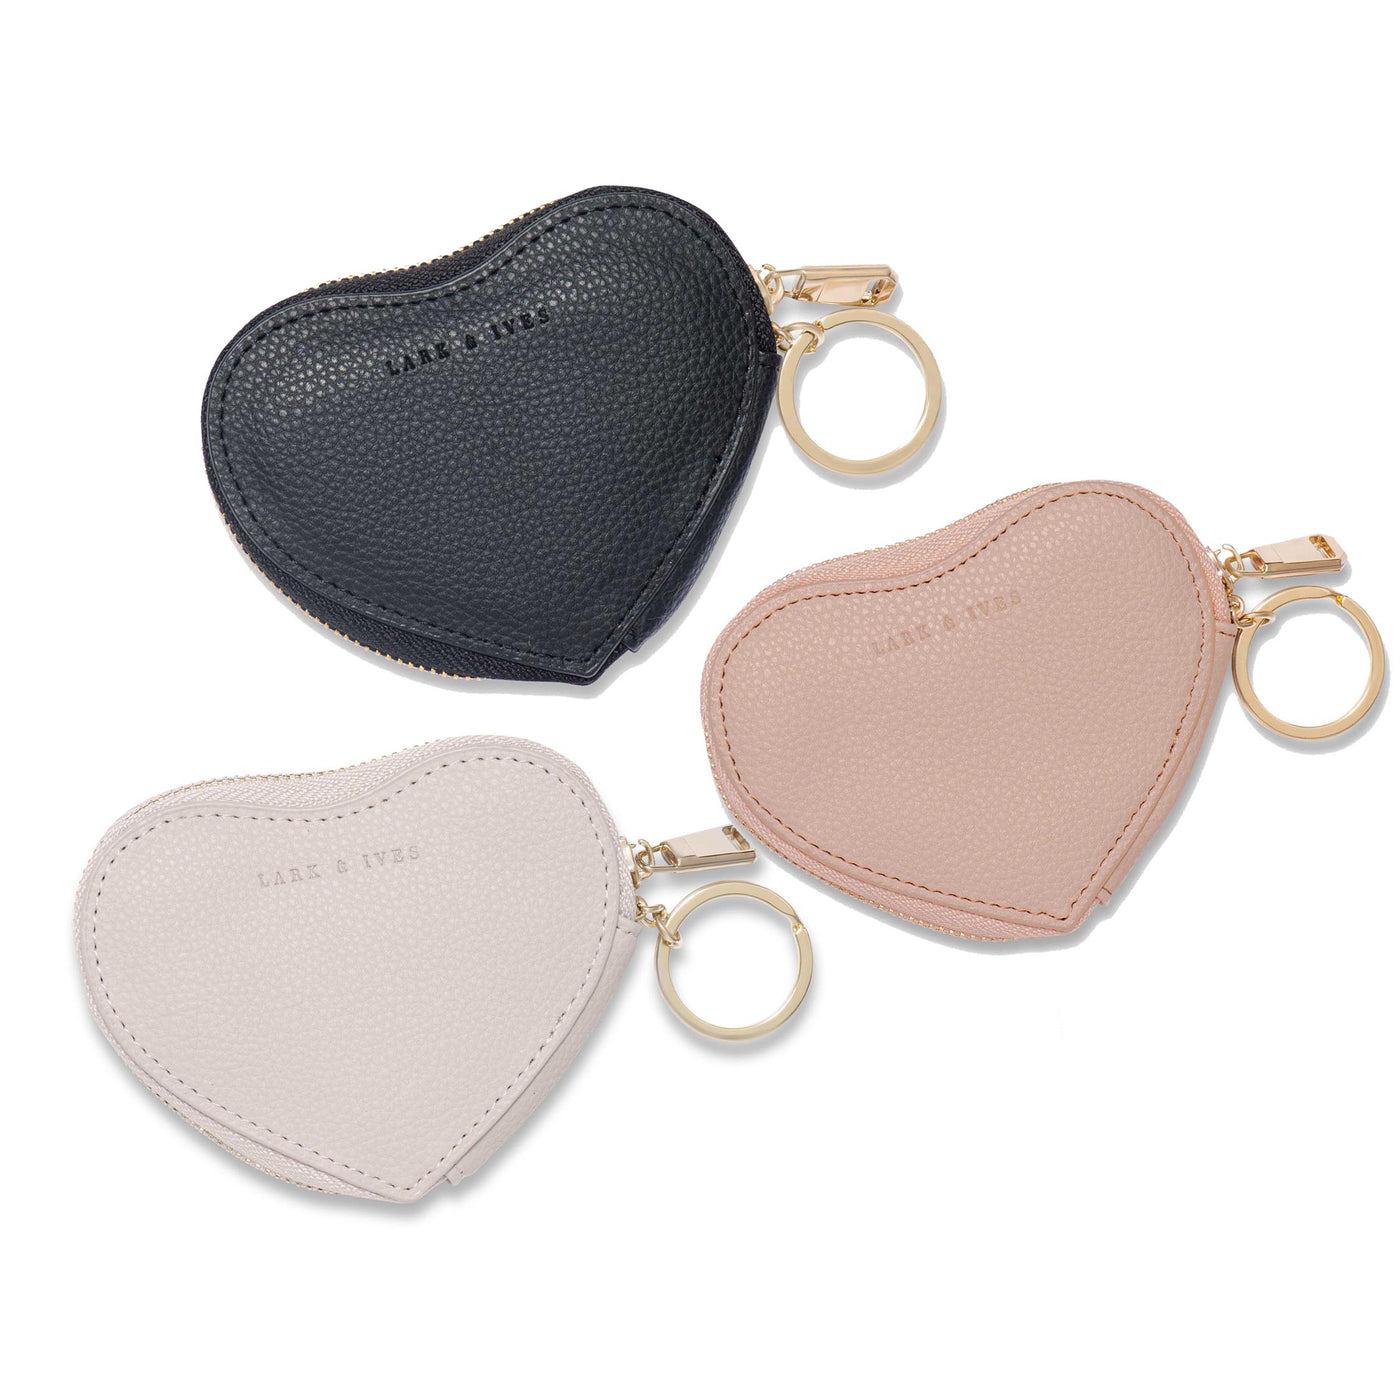 Lark and Ives / Vegan Leather Accessories / Small Accessories / Coin Purse / Heart shaped / Coin Pouch / Mini Wallet / Black, Nude Pink and Light Grey / Set of three